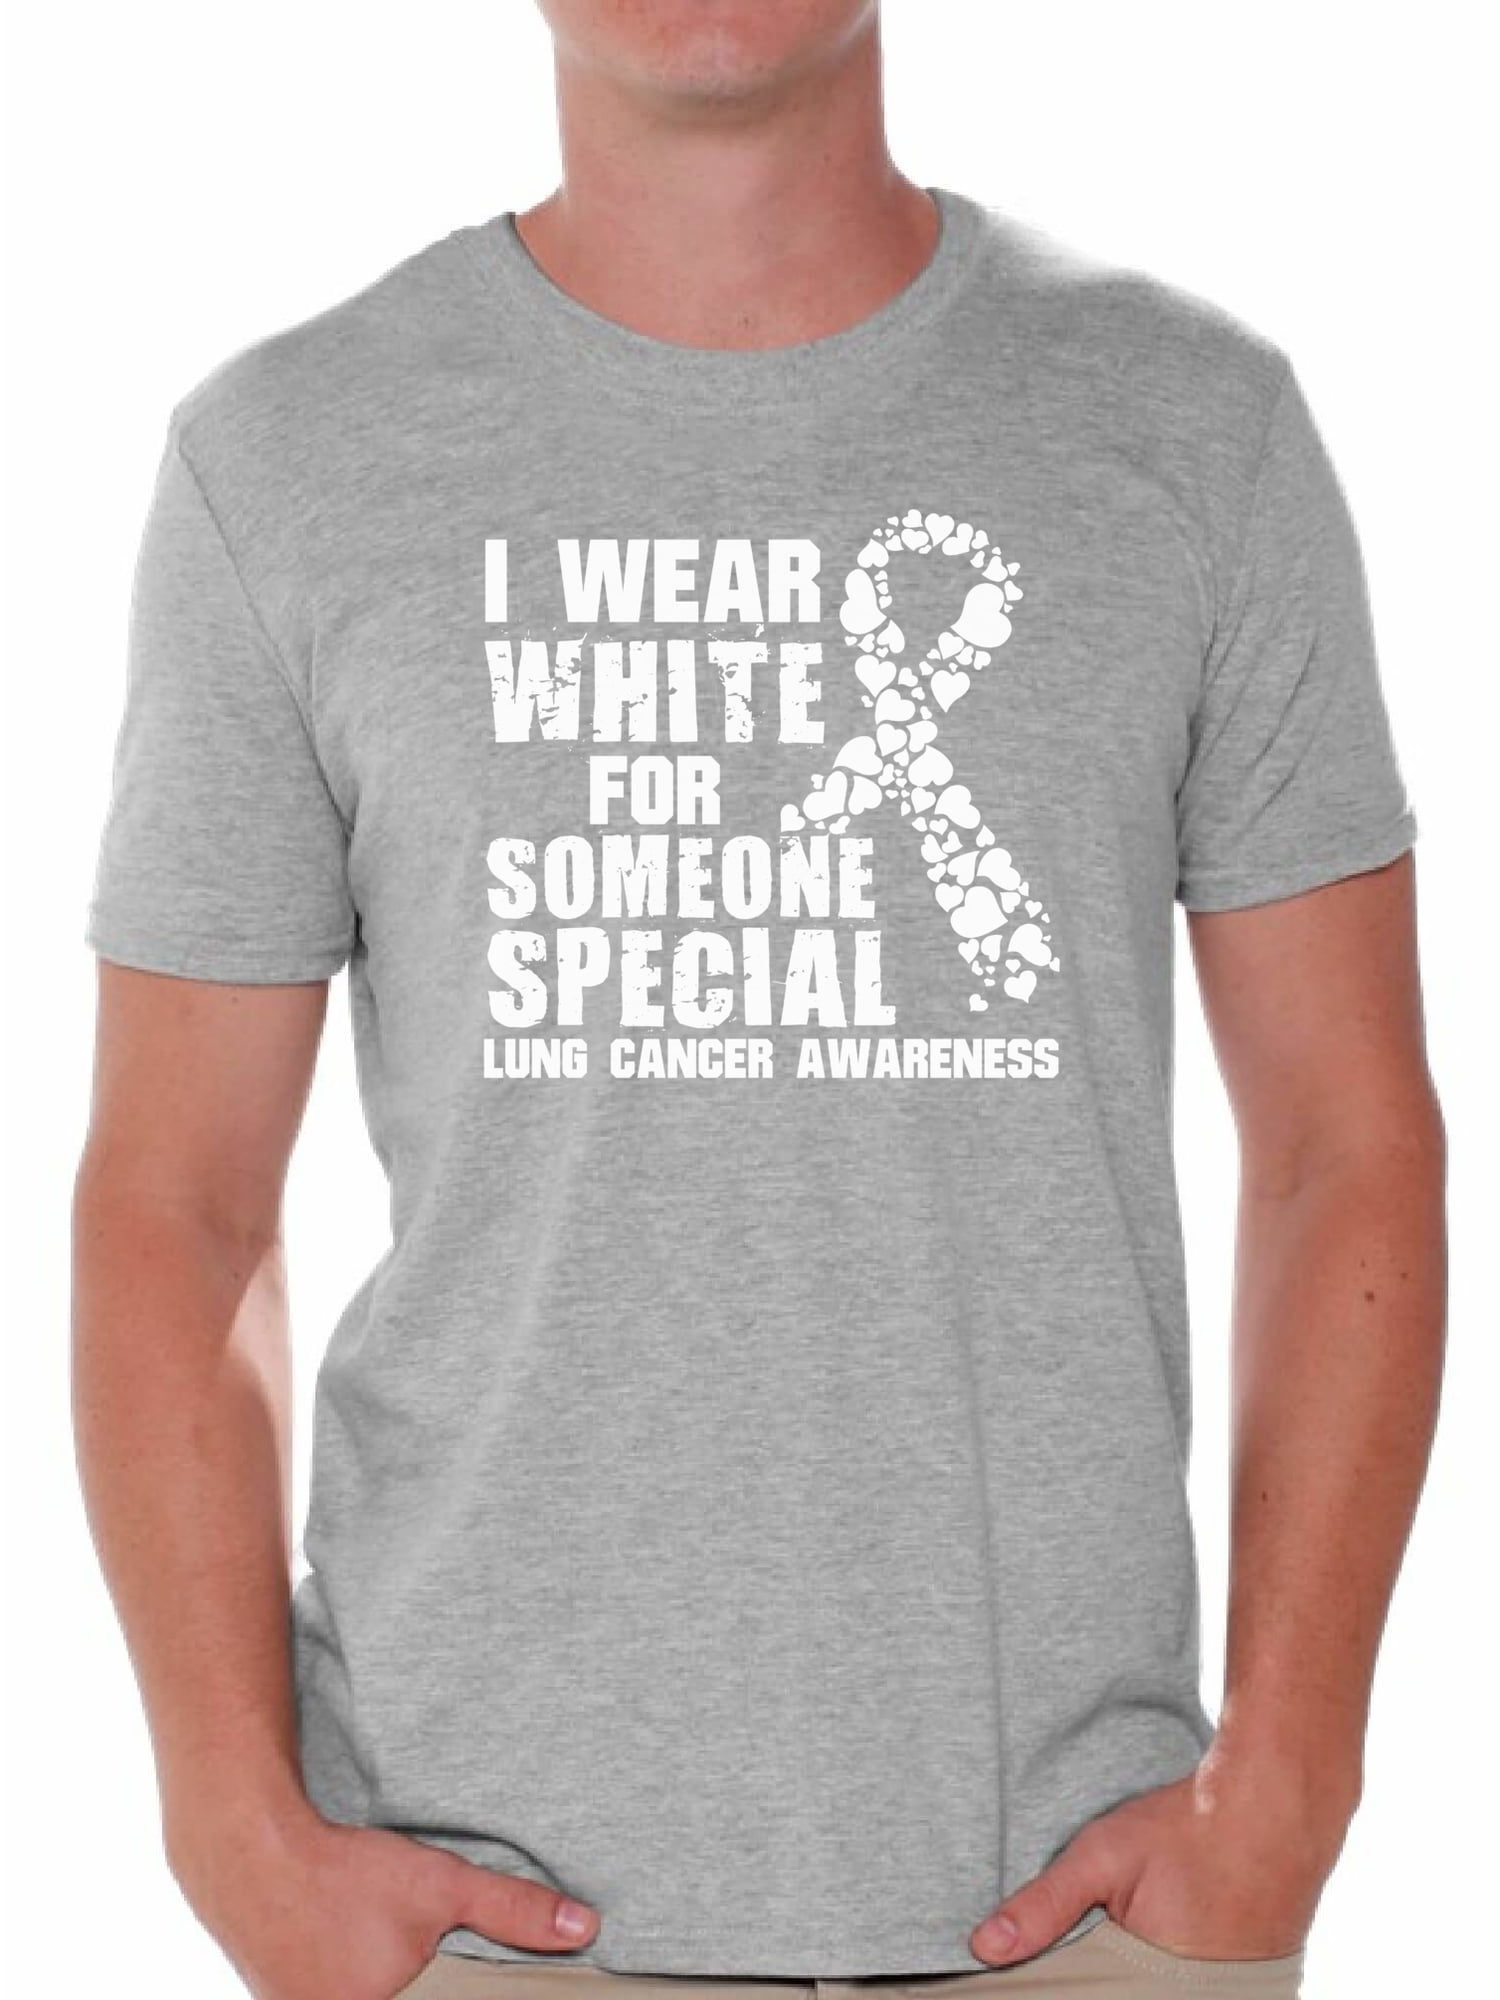 Lung Cancer Shirts Tops T-shirts for Men Men's I Wear White for My Dad 